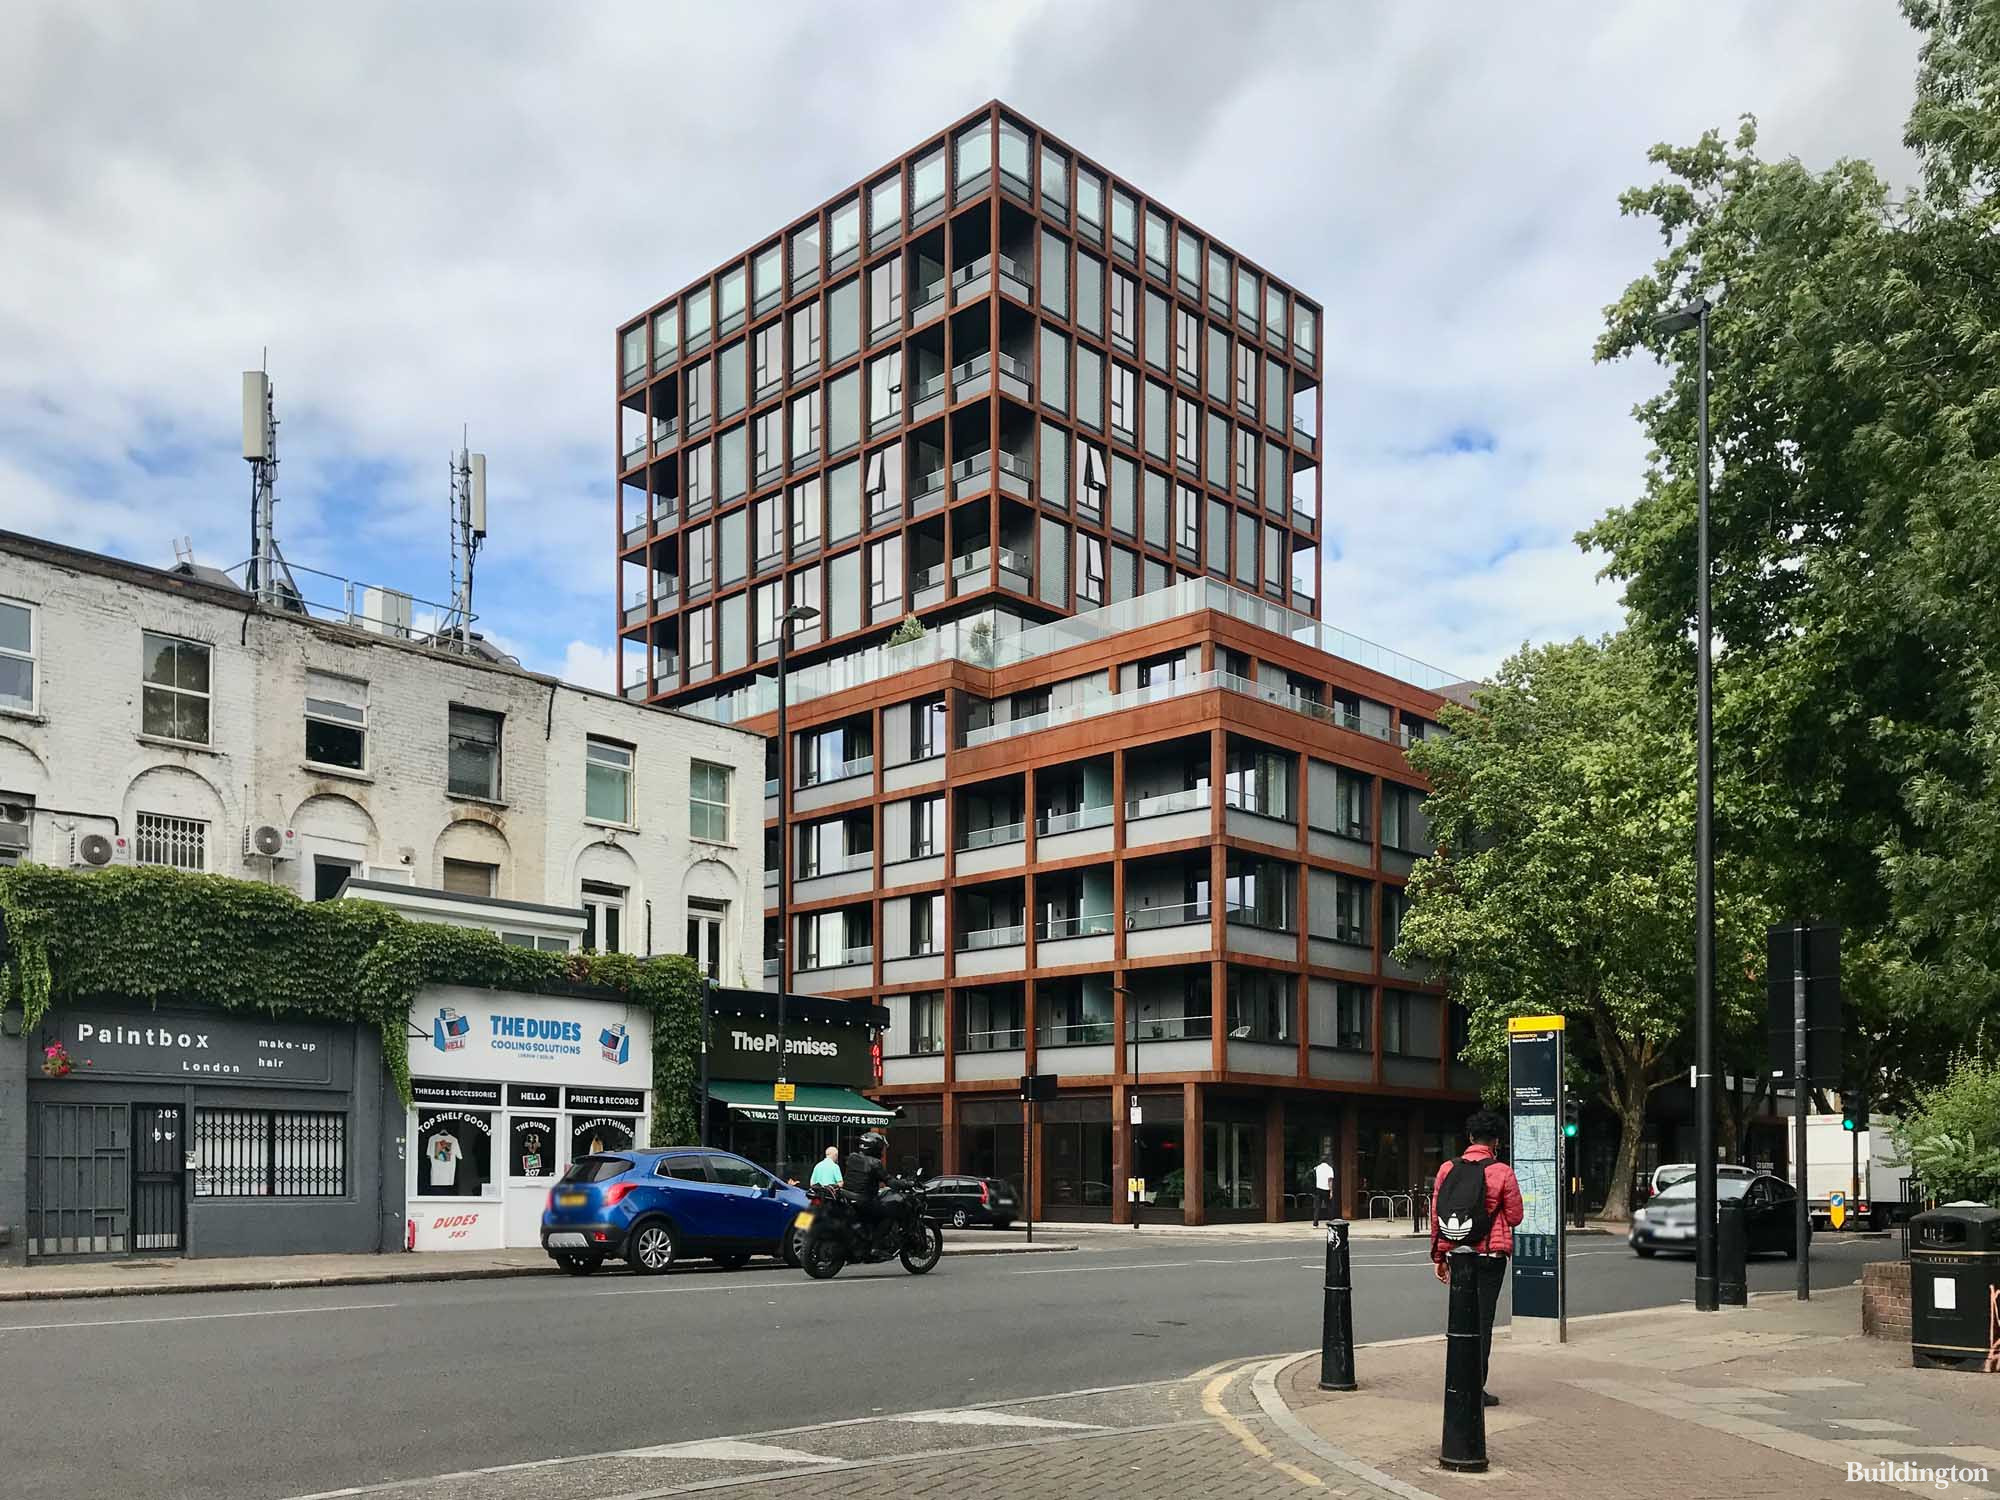 HKR Hoxton development by LBS Properties on Hackney Road.